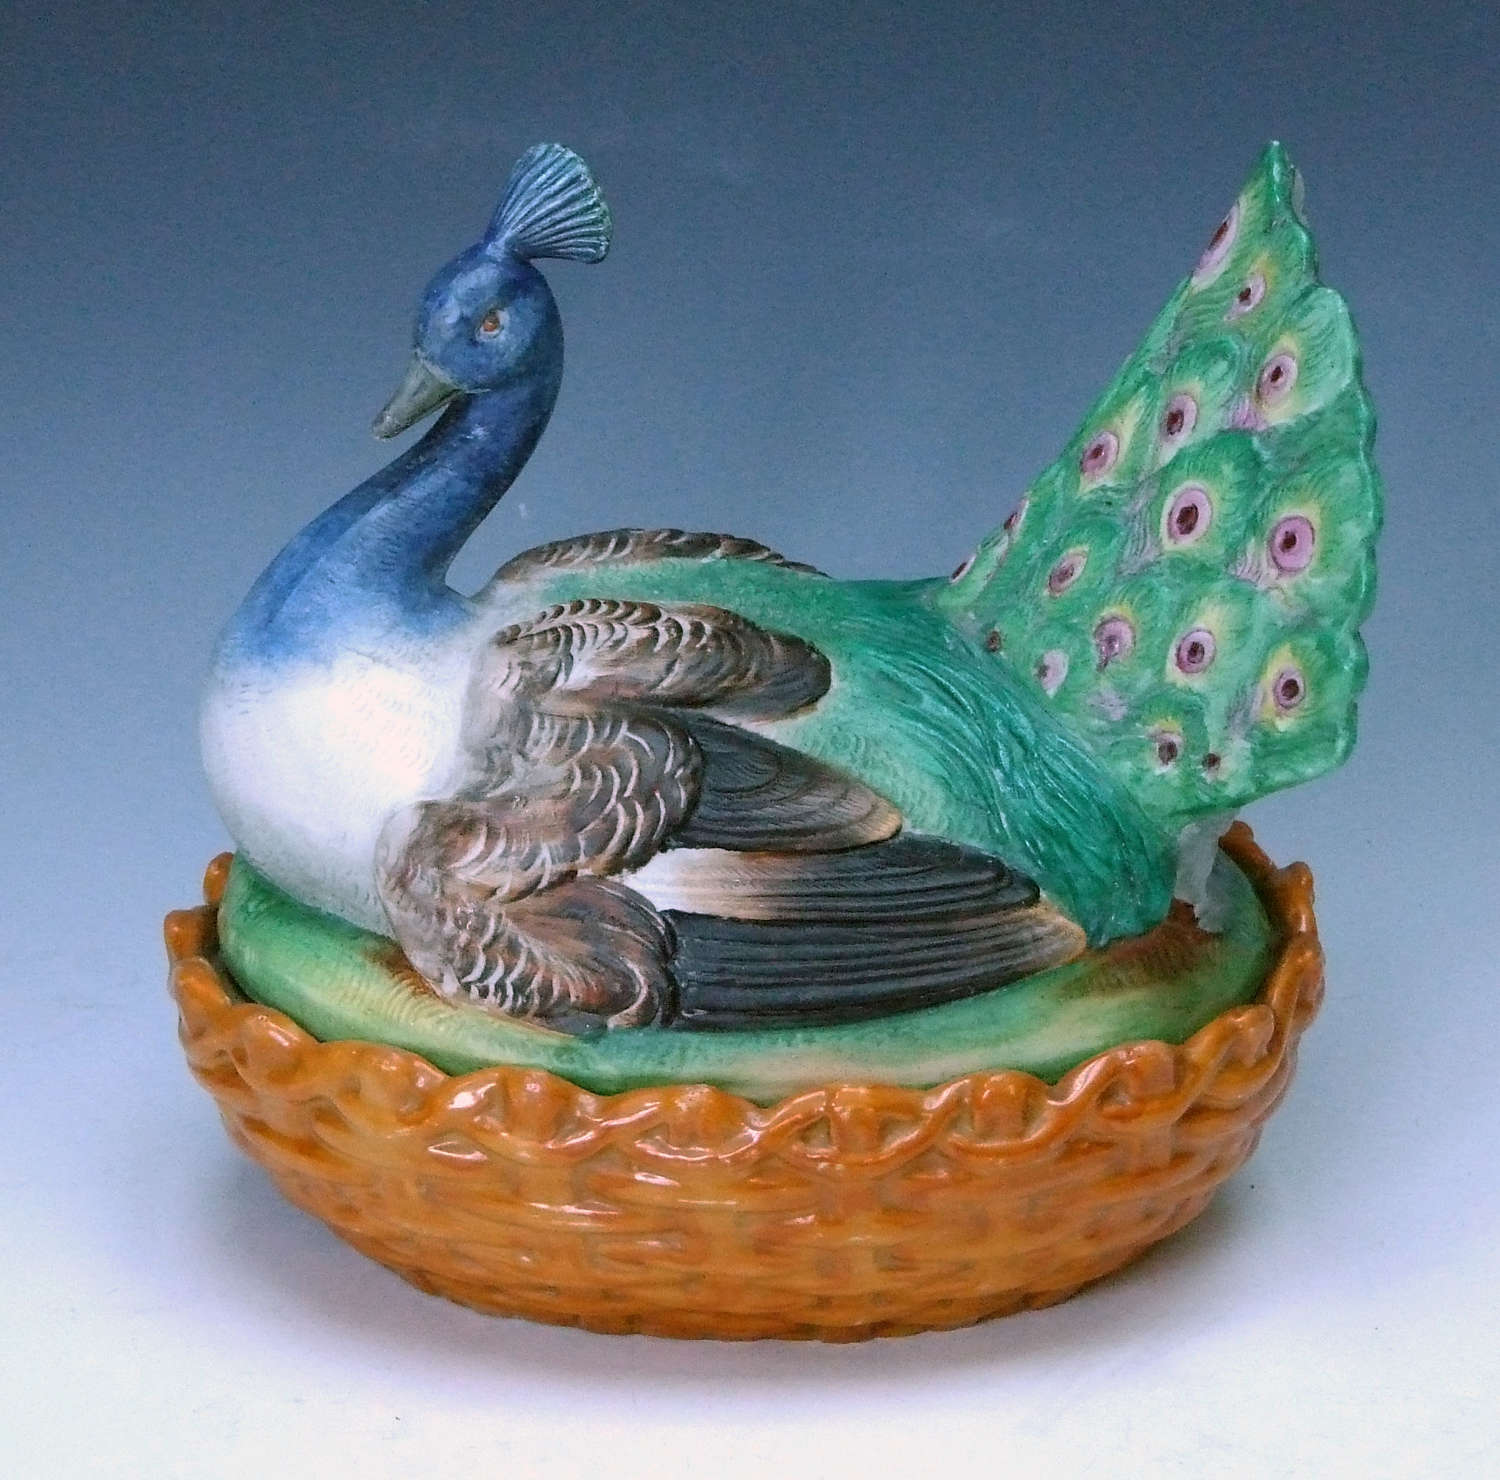 A uniquely rare painted bisque peacock motif tureen and cover